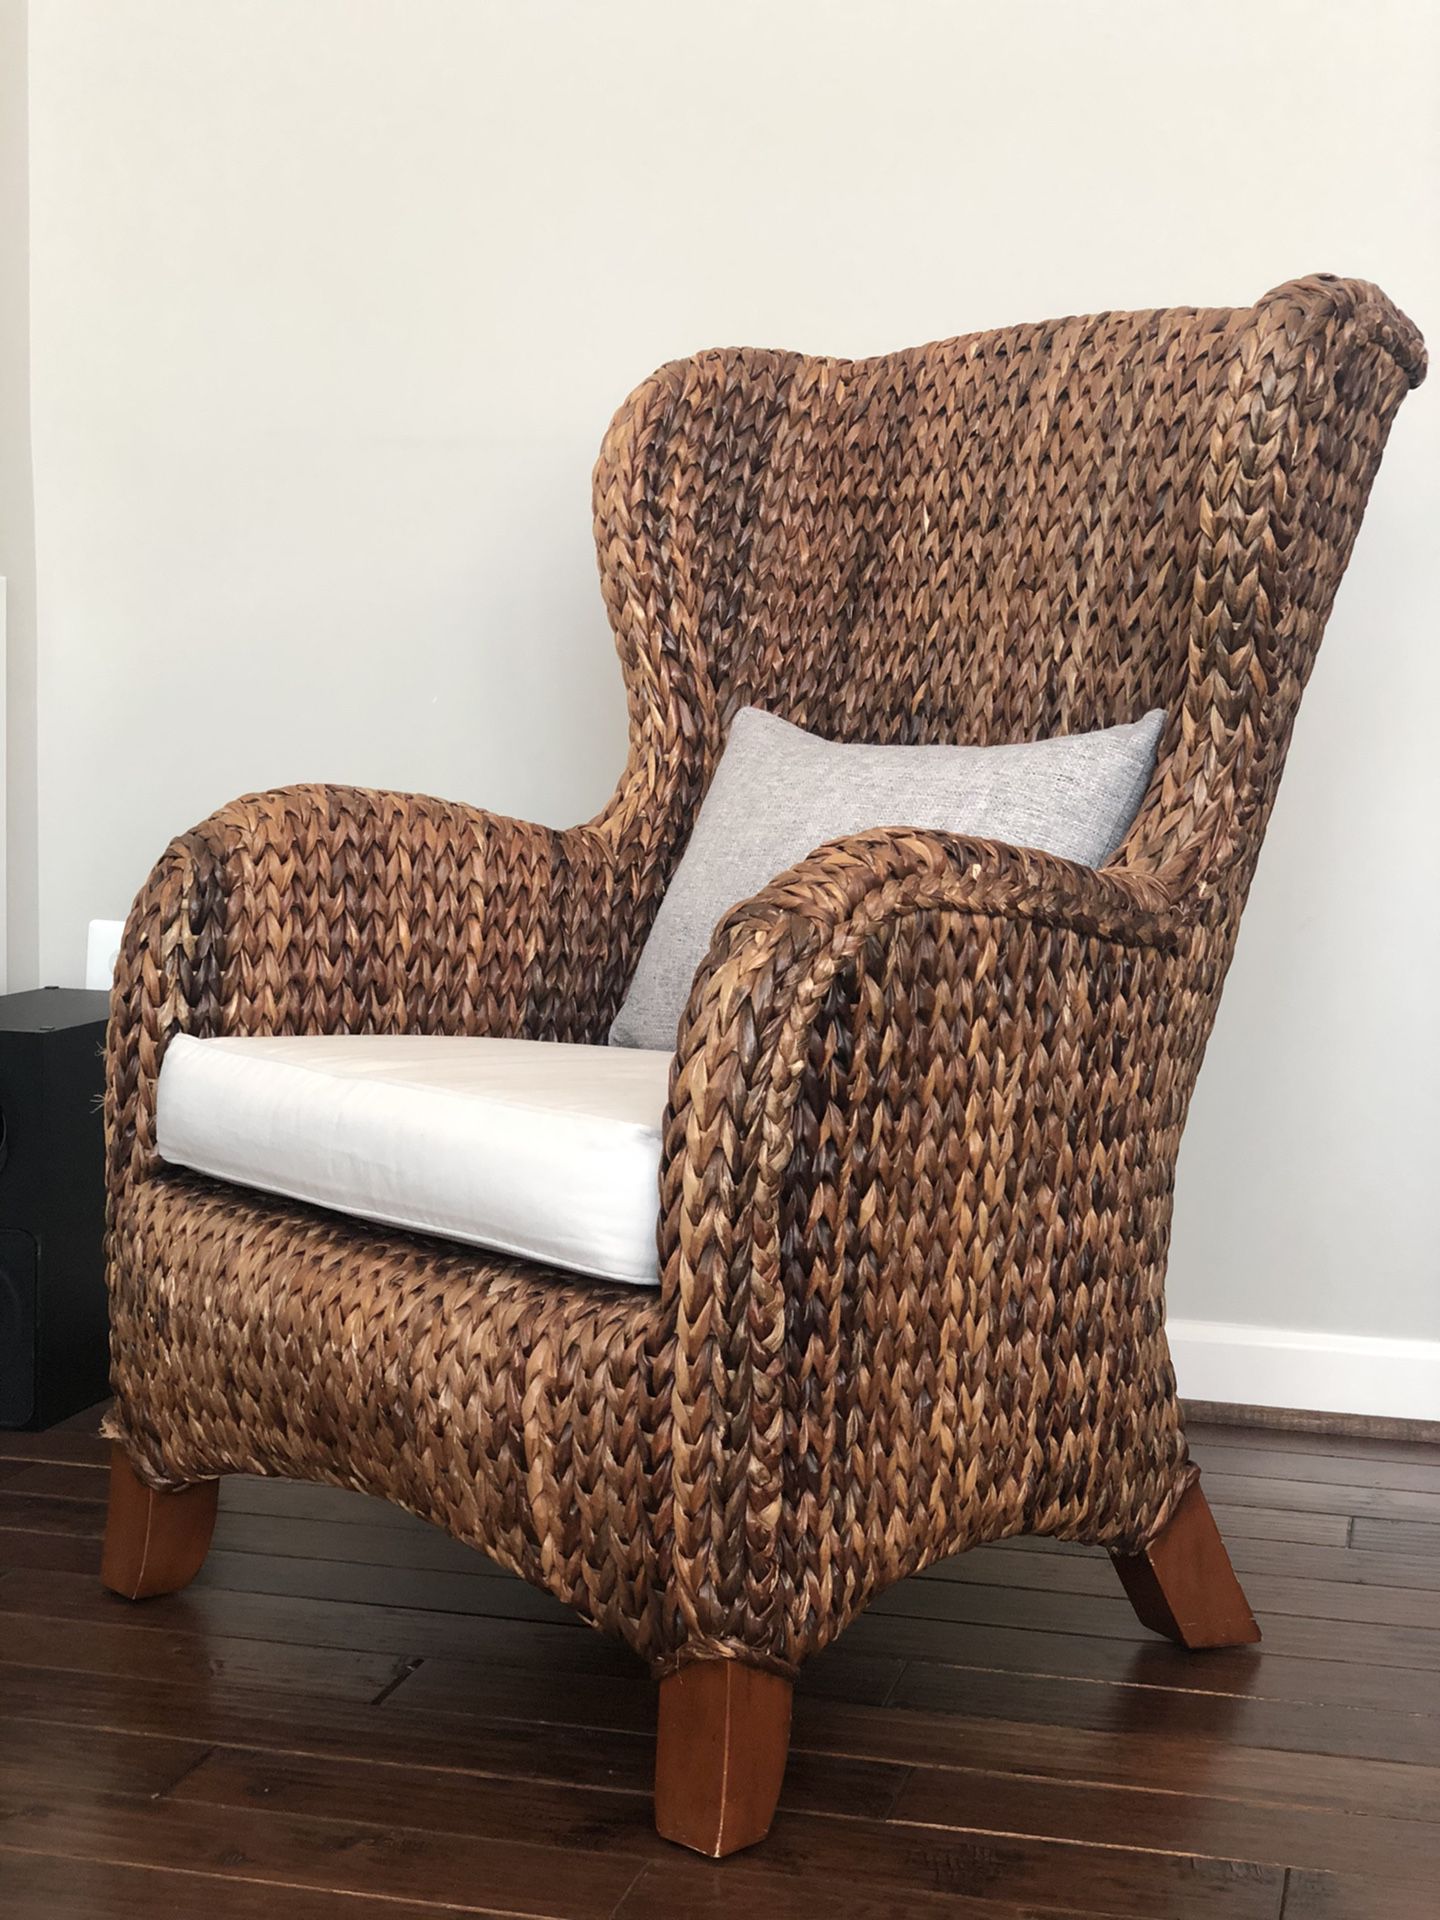 Pottery Barn Seagrass Chair